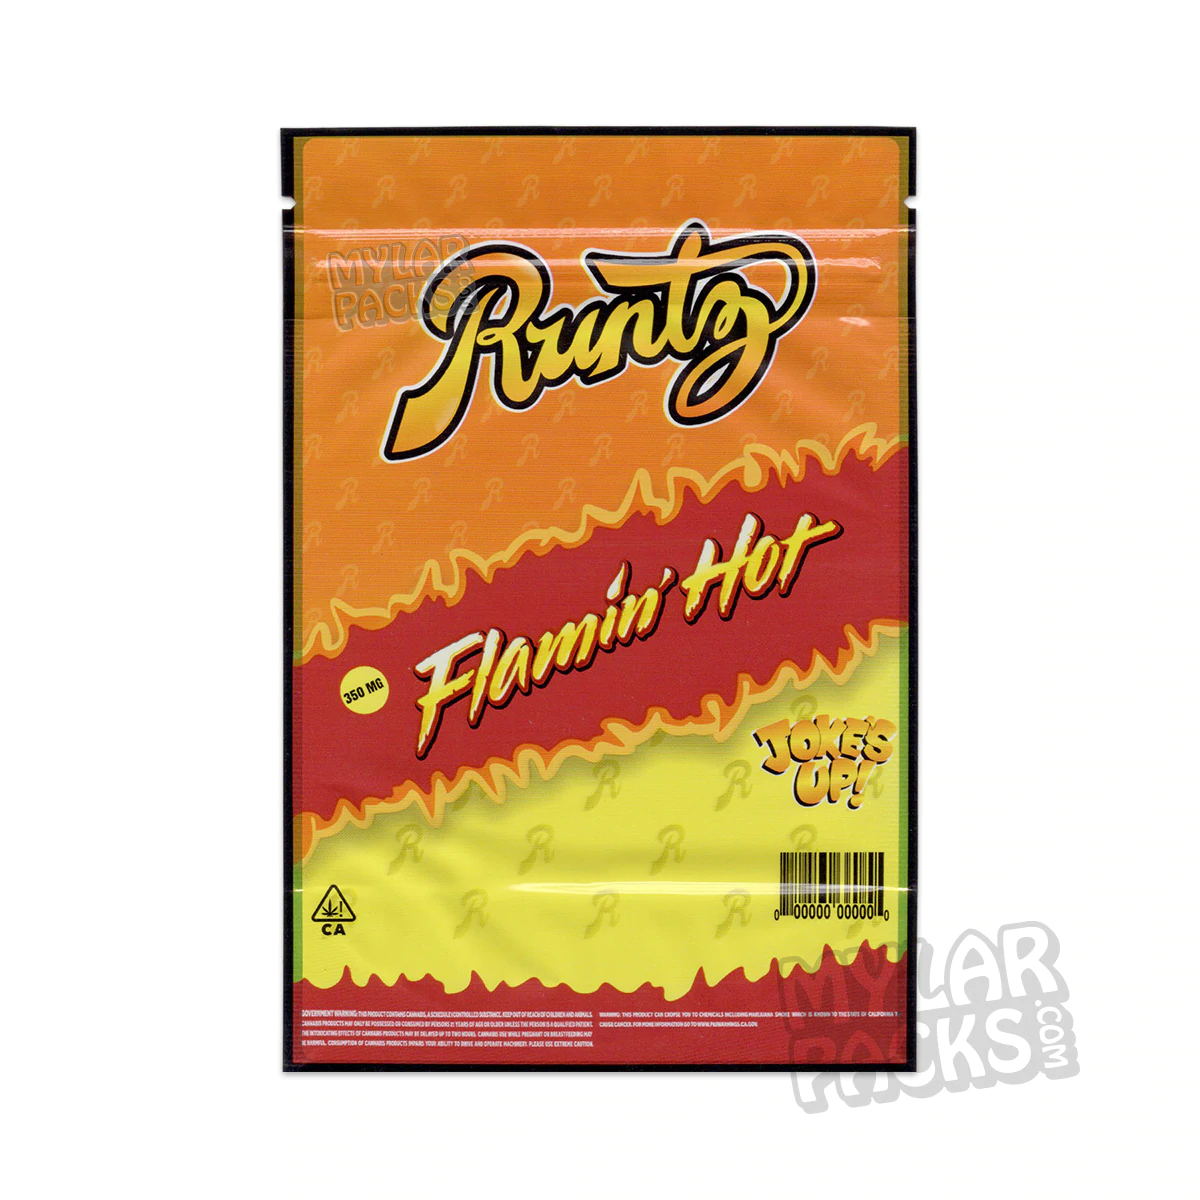 Chesterrz Flamin' Hot Fries 500mg Empty Chips Edibles Mylar Bag